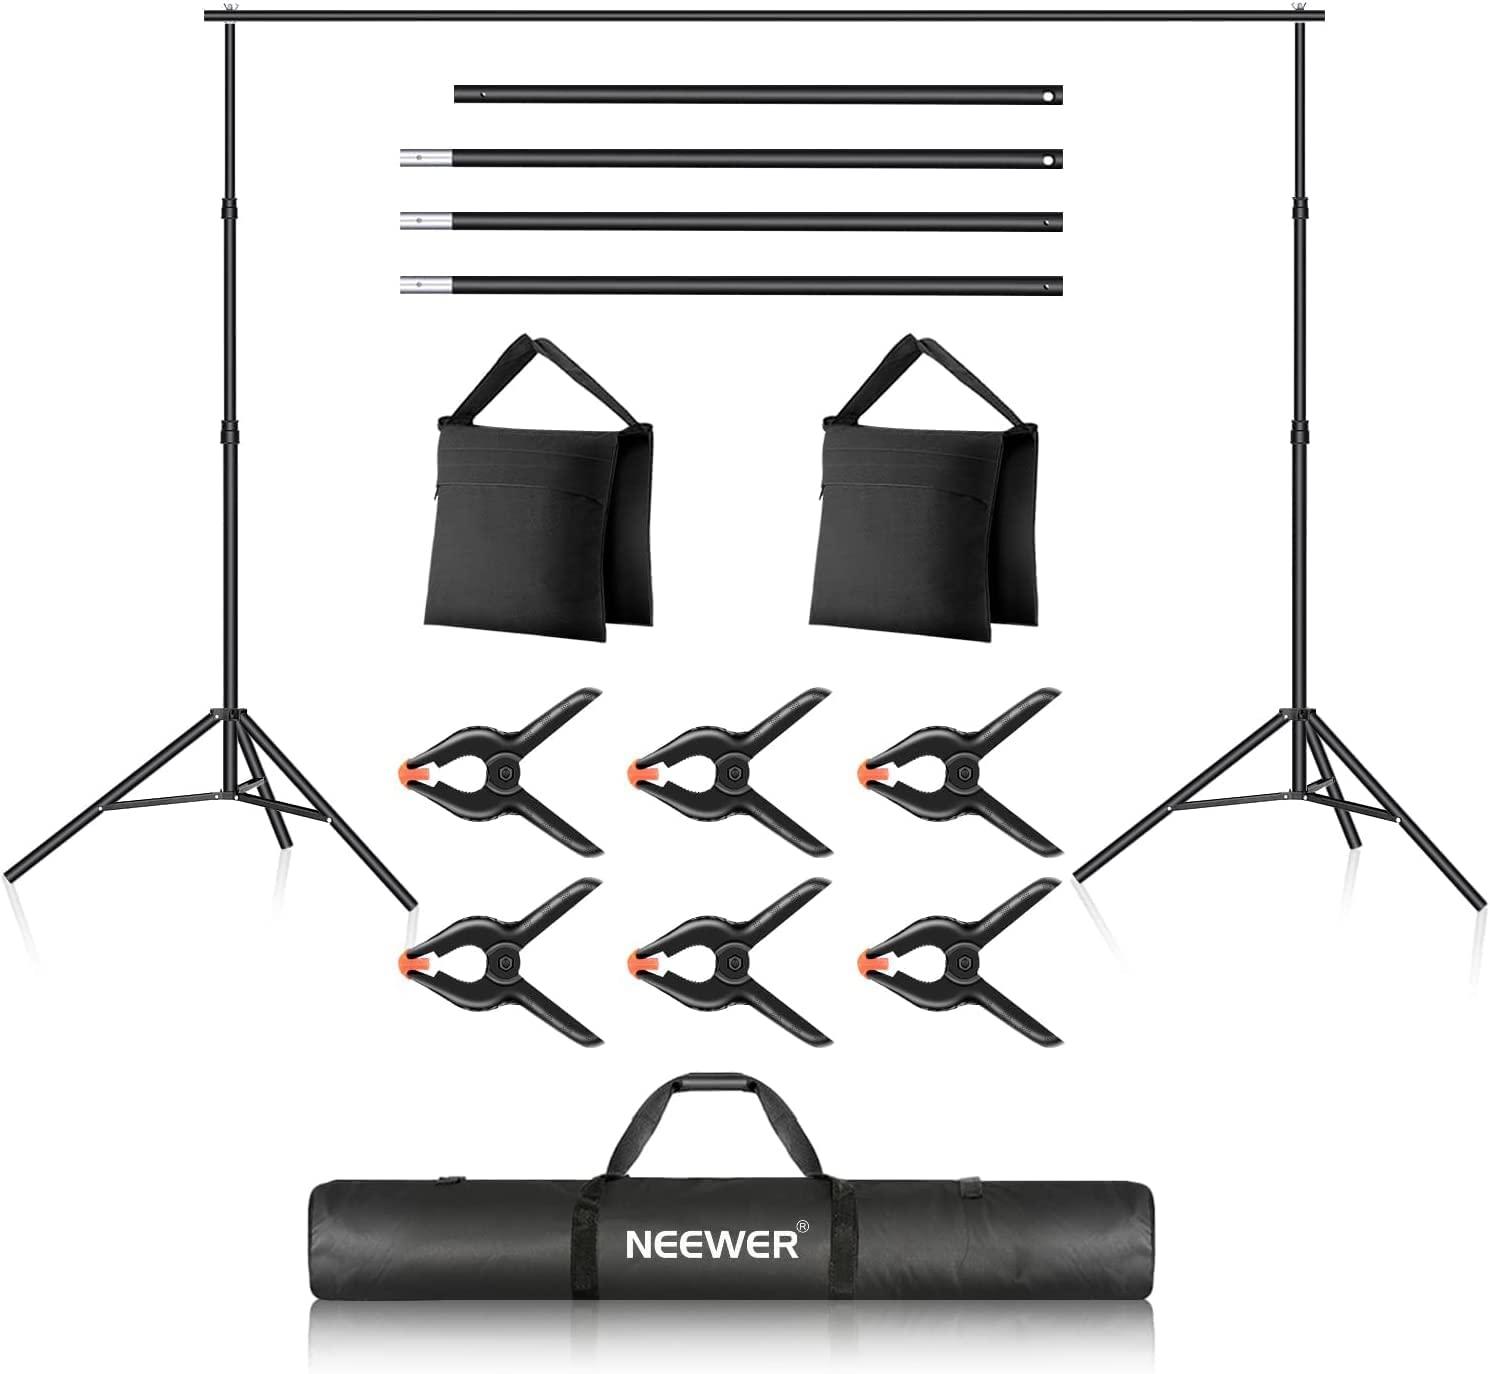 Neewer Photo Studio 10 x 7 Backdrop Support System for $21 Shipped